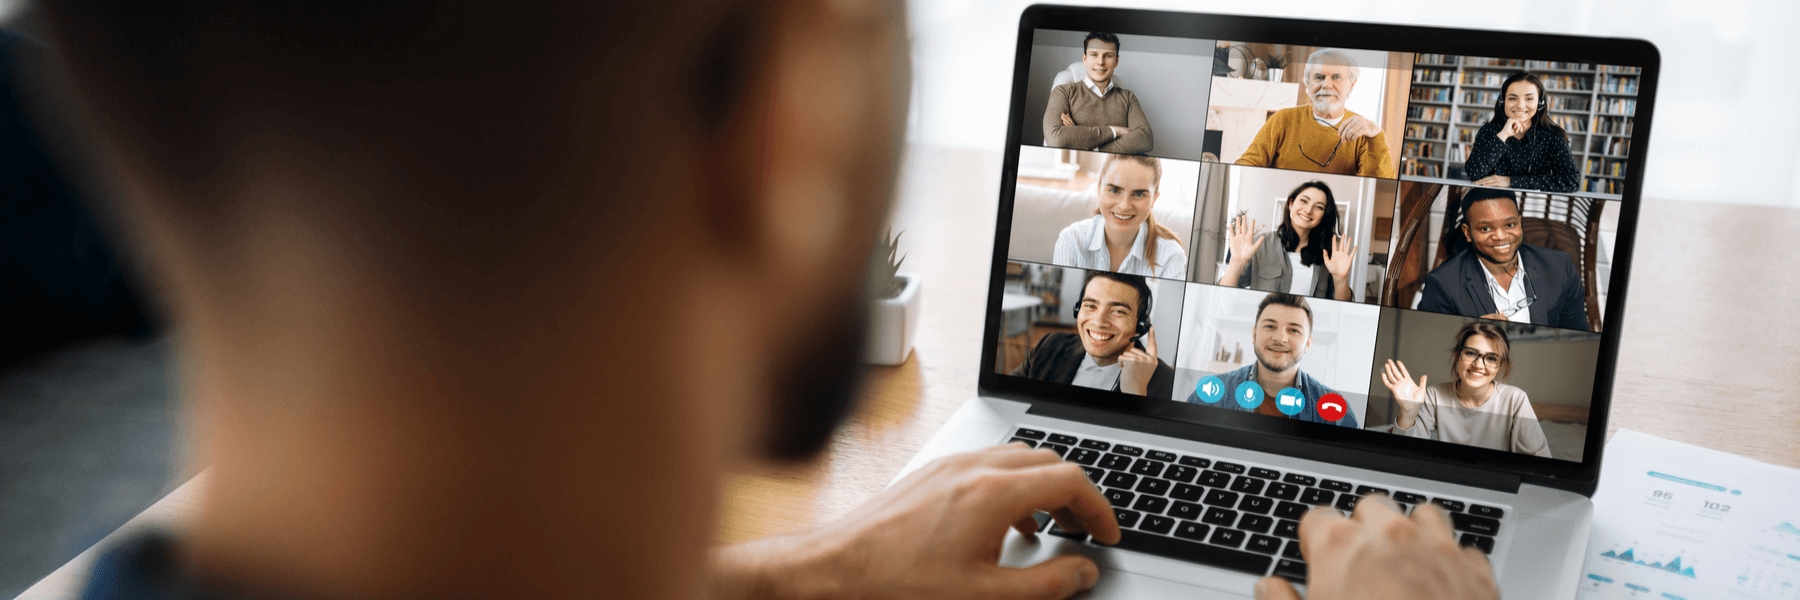 Remote worker on Zoom or digital video meeting with coworkers.